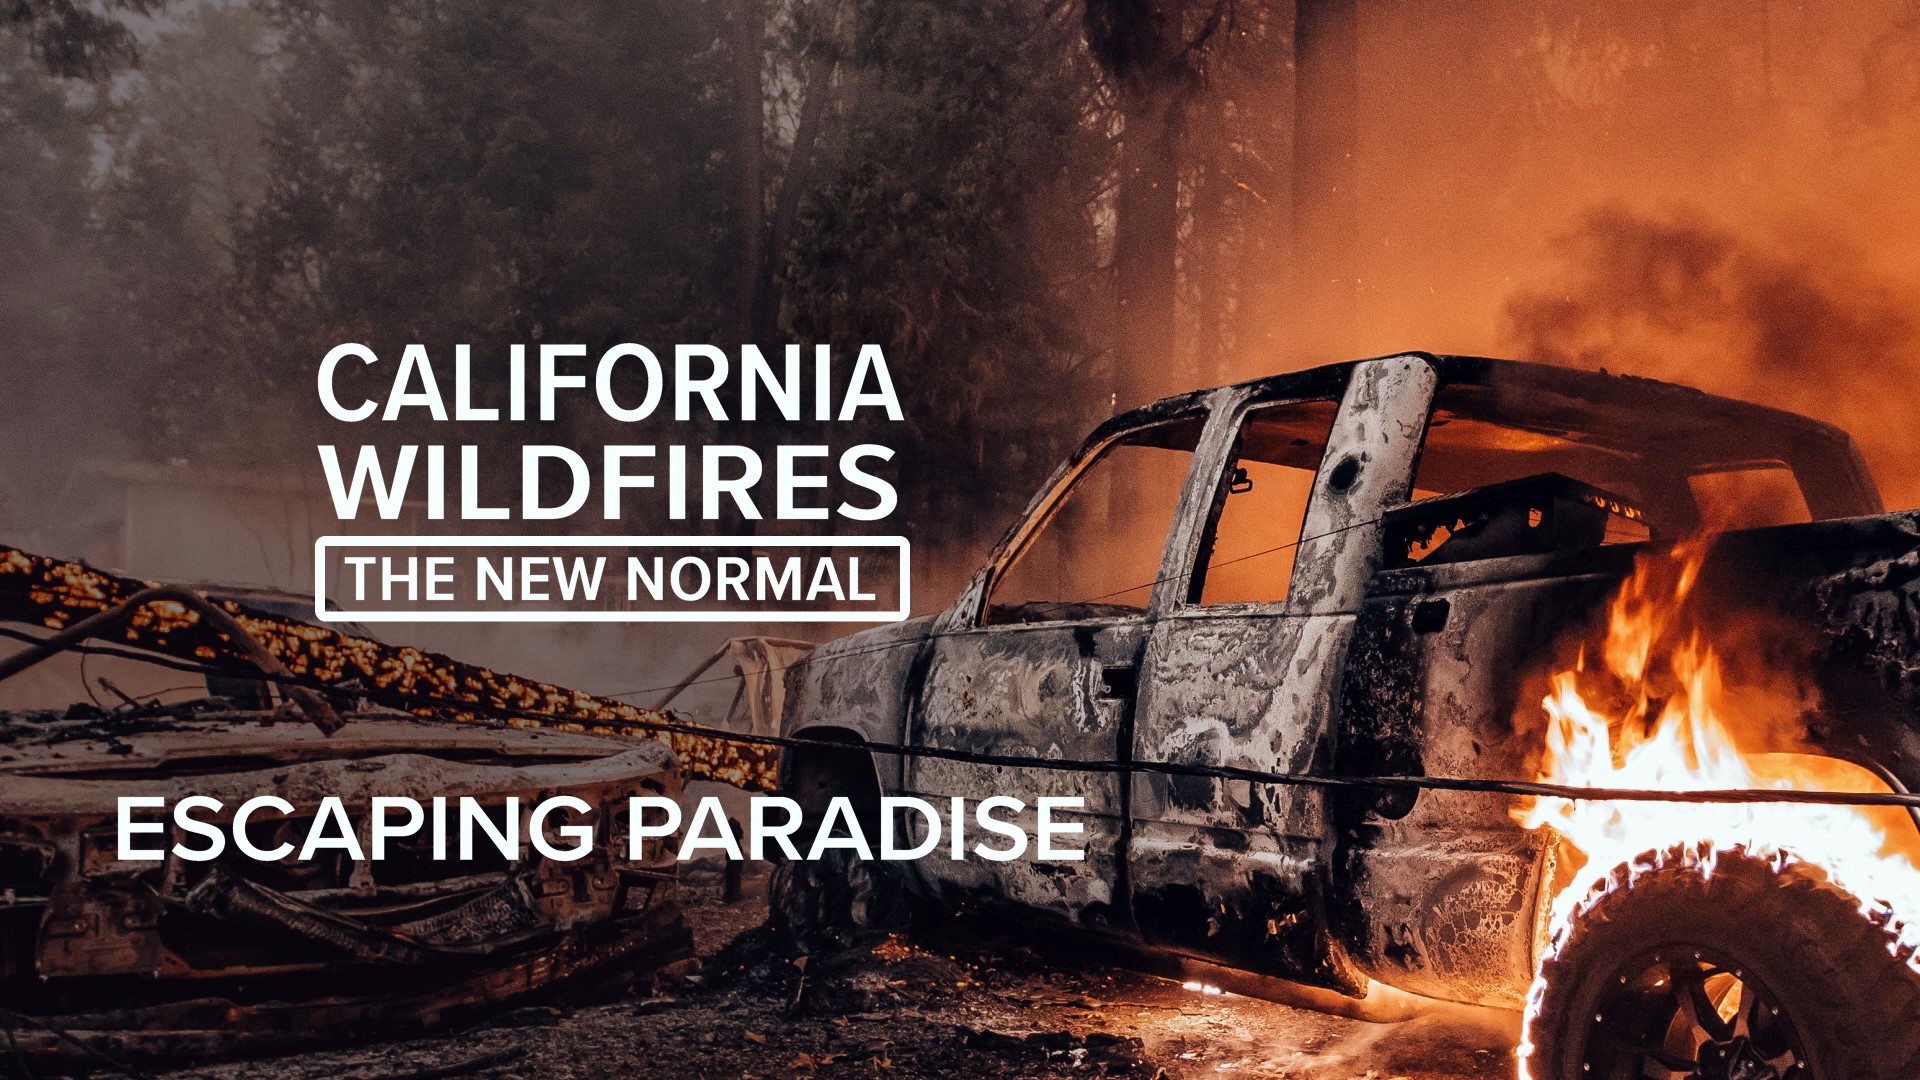 When the Camp Fire ignited, it started a chain of events that not many would have predicted. The fire forced the entire population to evacuate at once--an action emergency managers had actively avoided in their plans for handling wildfires.